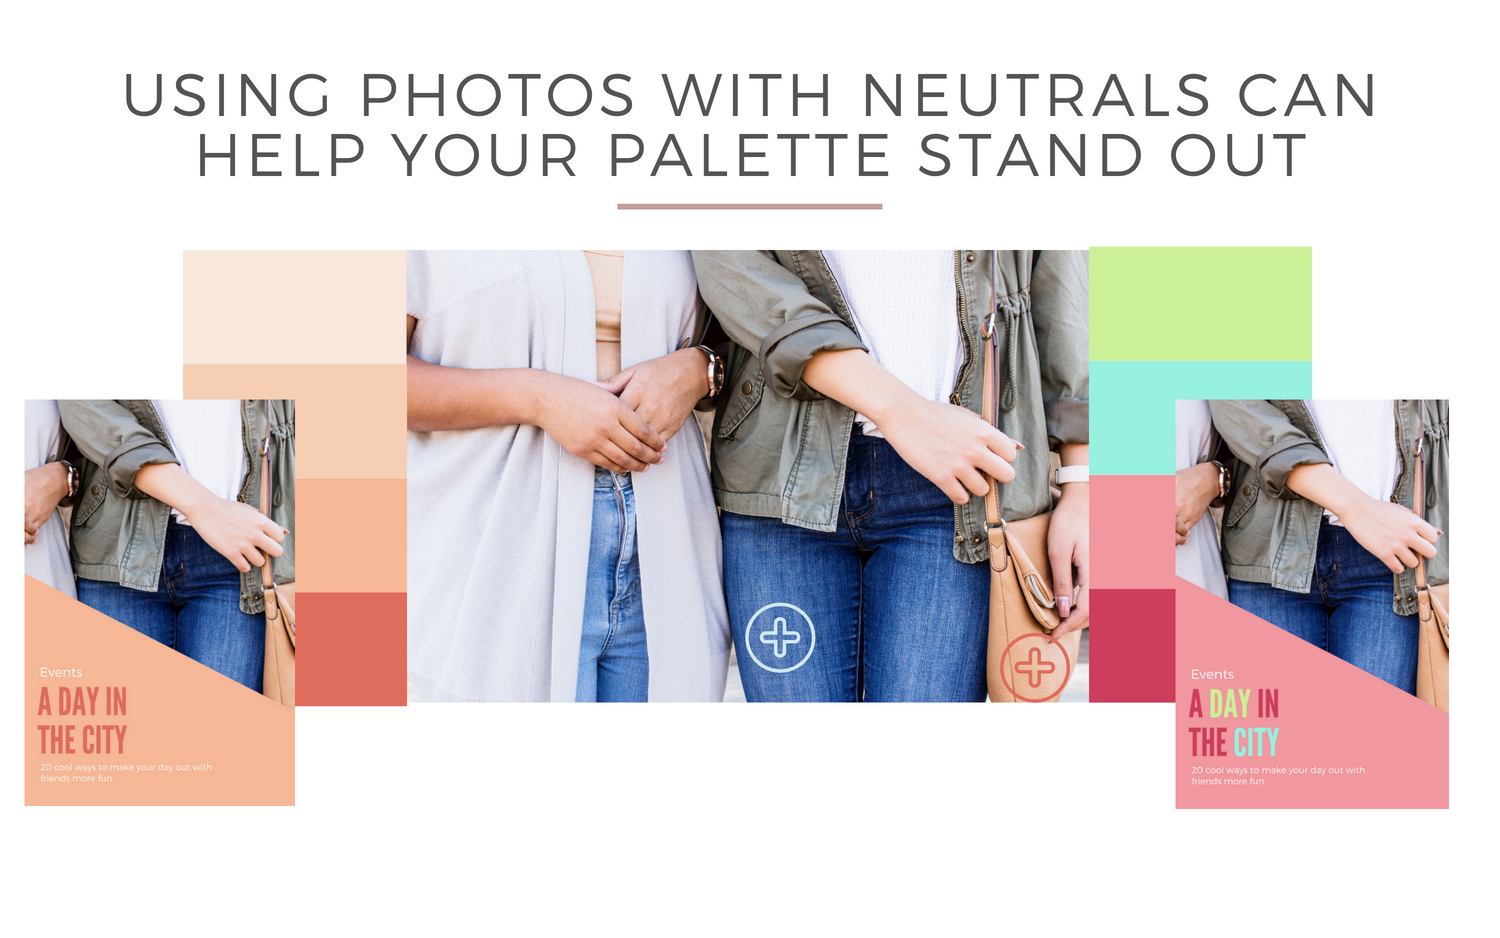 Smartest ways to use stock photos for your brand || Grab the tools and resources for pairing photos with your brand and different types of color palettes. These tips are unexpected and will totally open up your branding world!